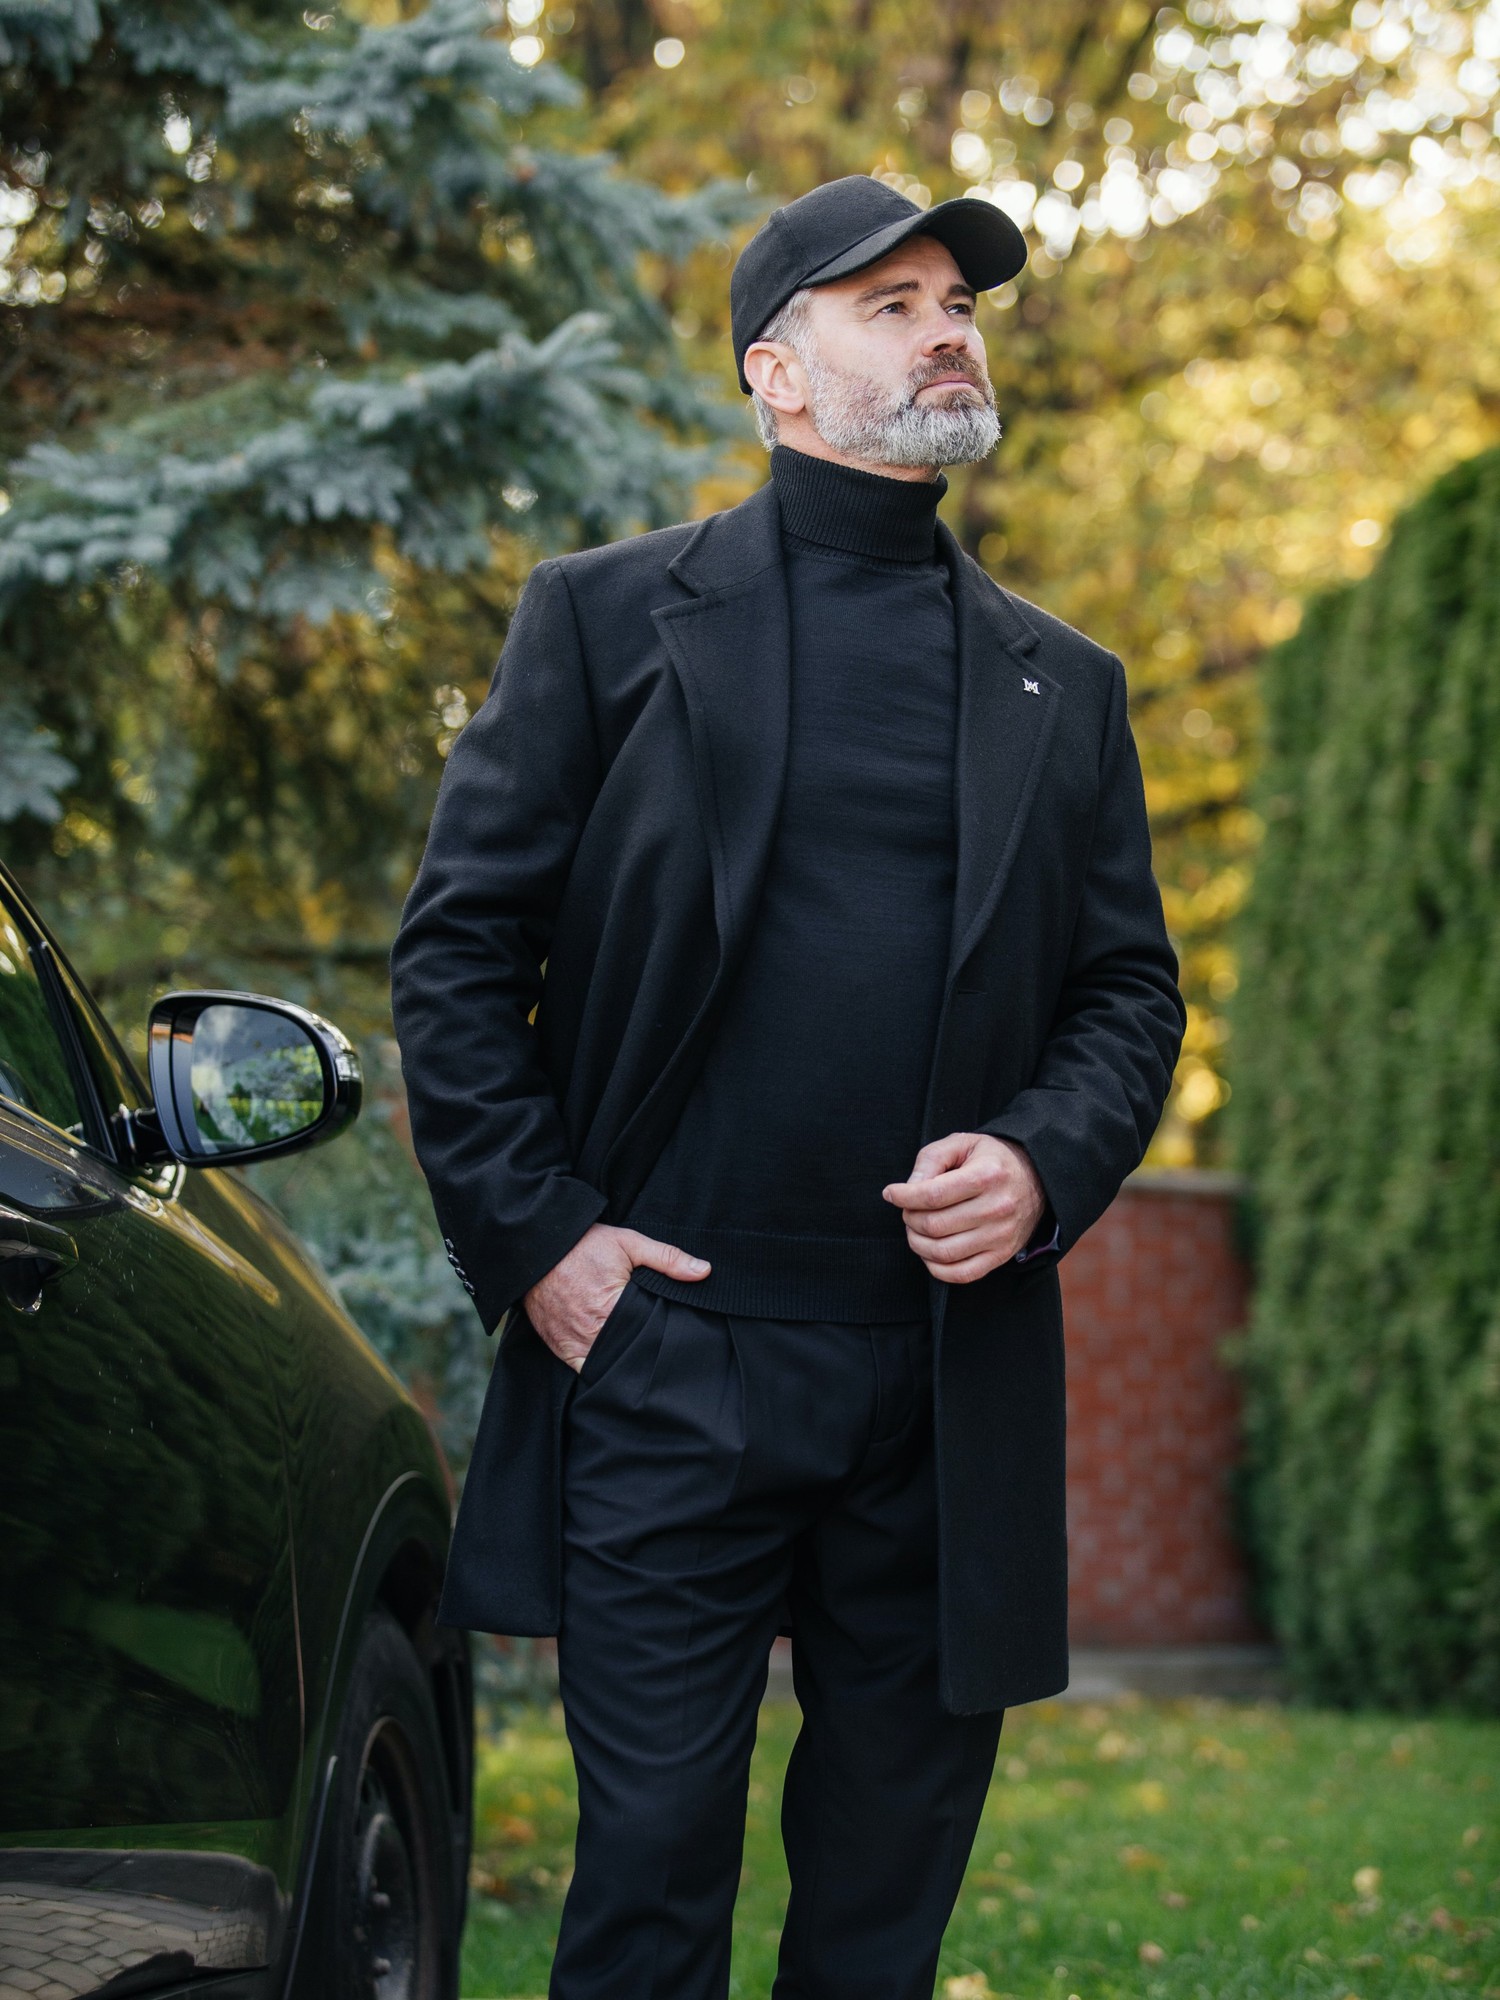 Black wool and cashmere coat